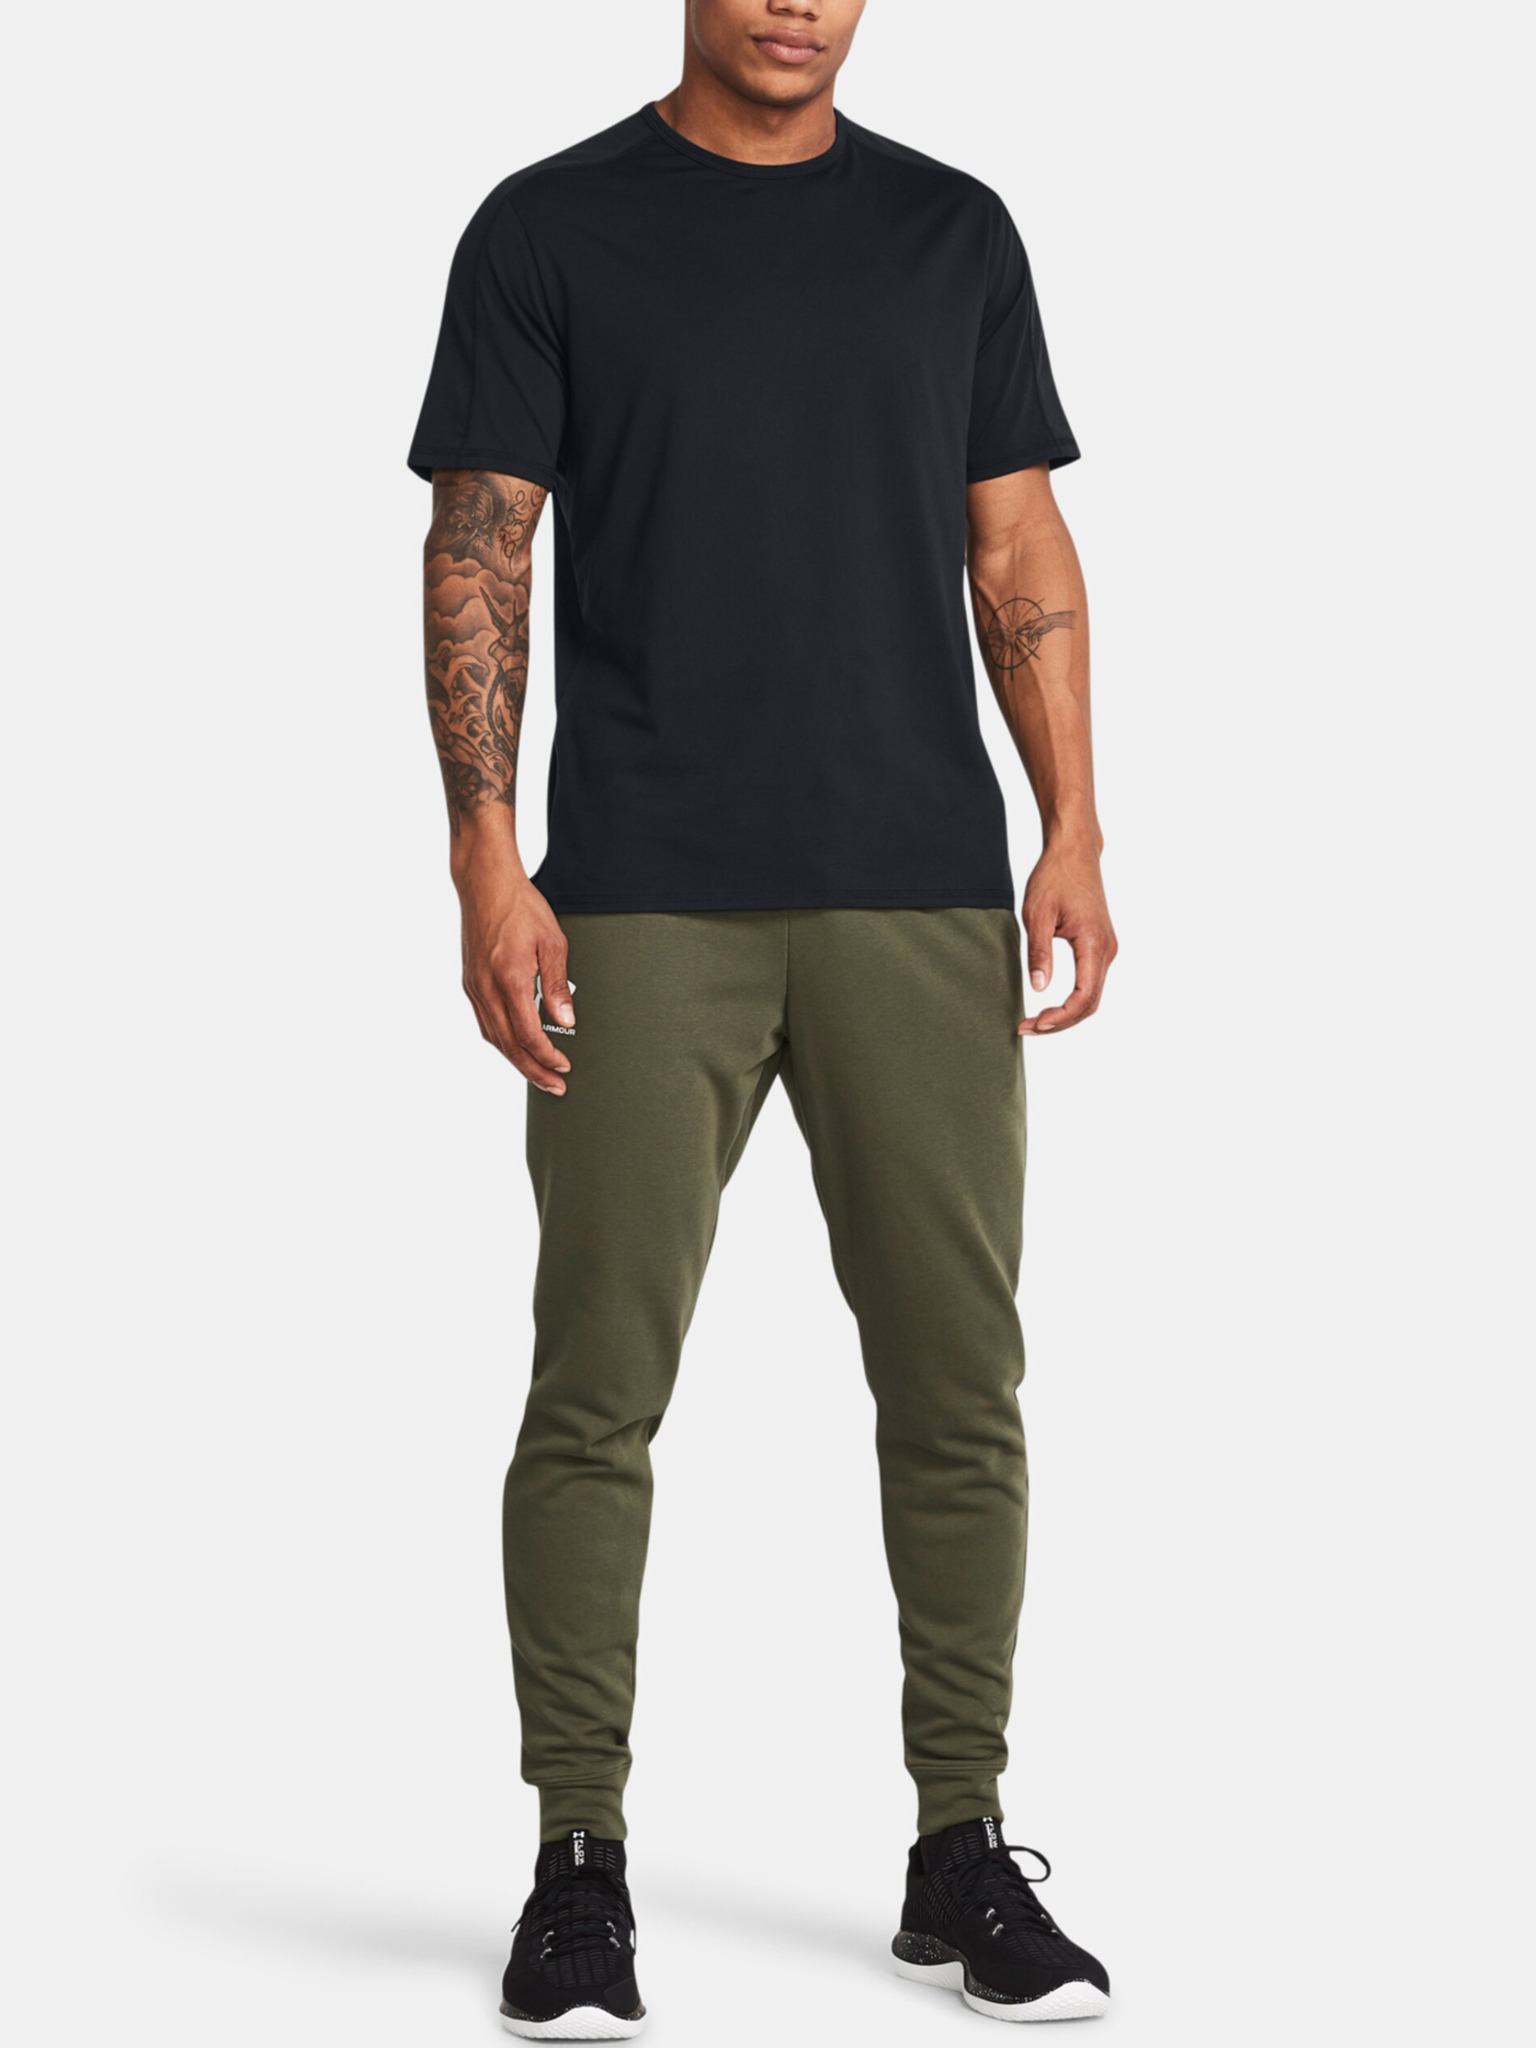 Under Armour Men's UA Rival Terry Joggers in KSA